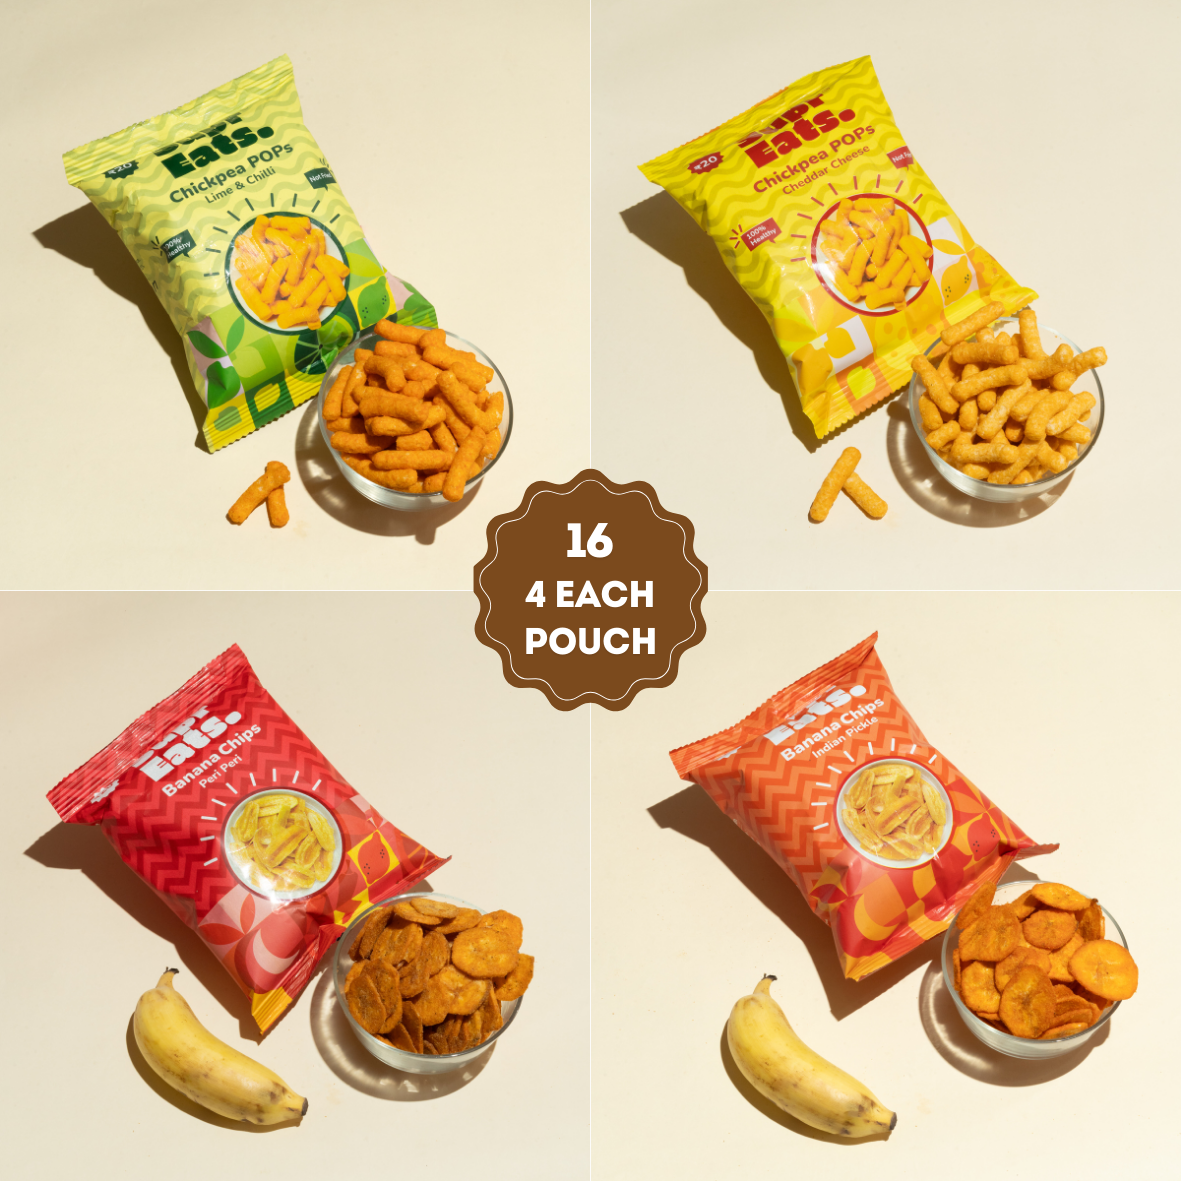 Banana Chips | Chickpea PoPs | Each pack 4X | 16 Pouch